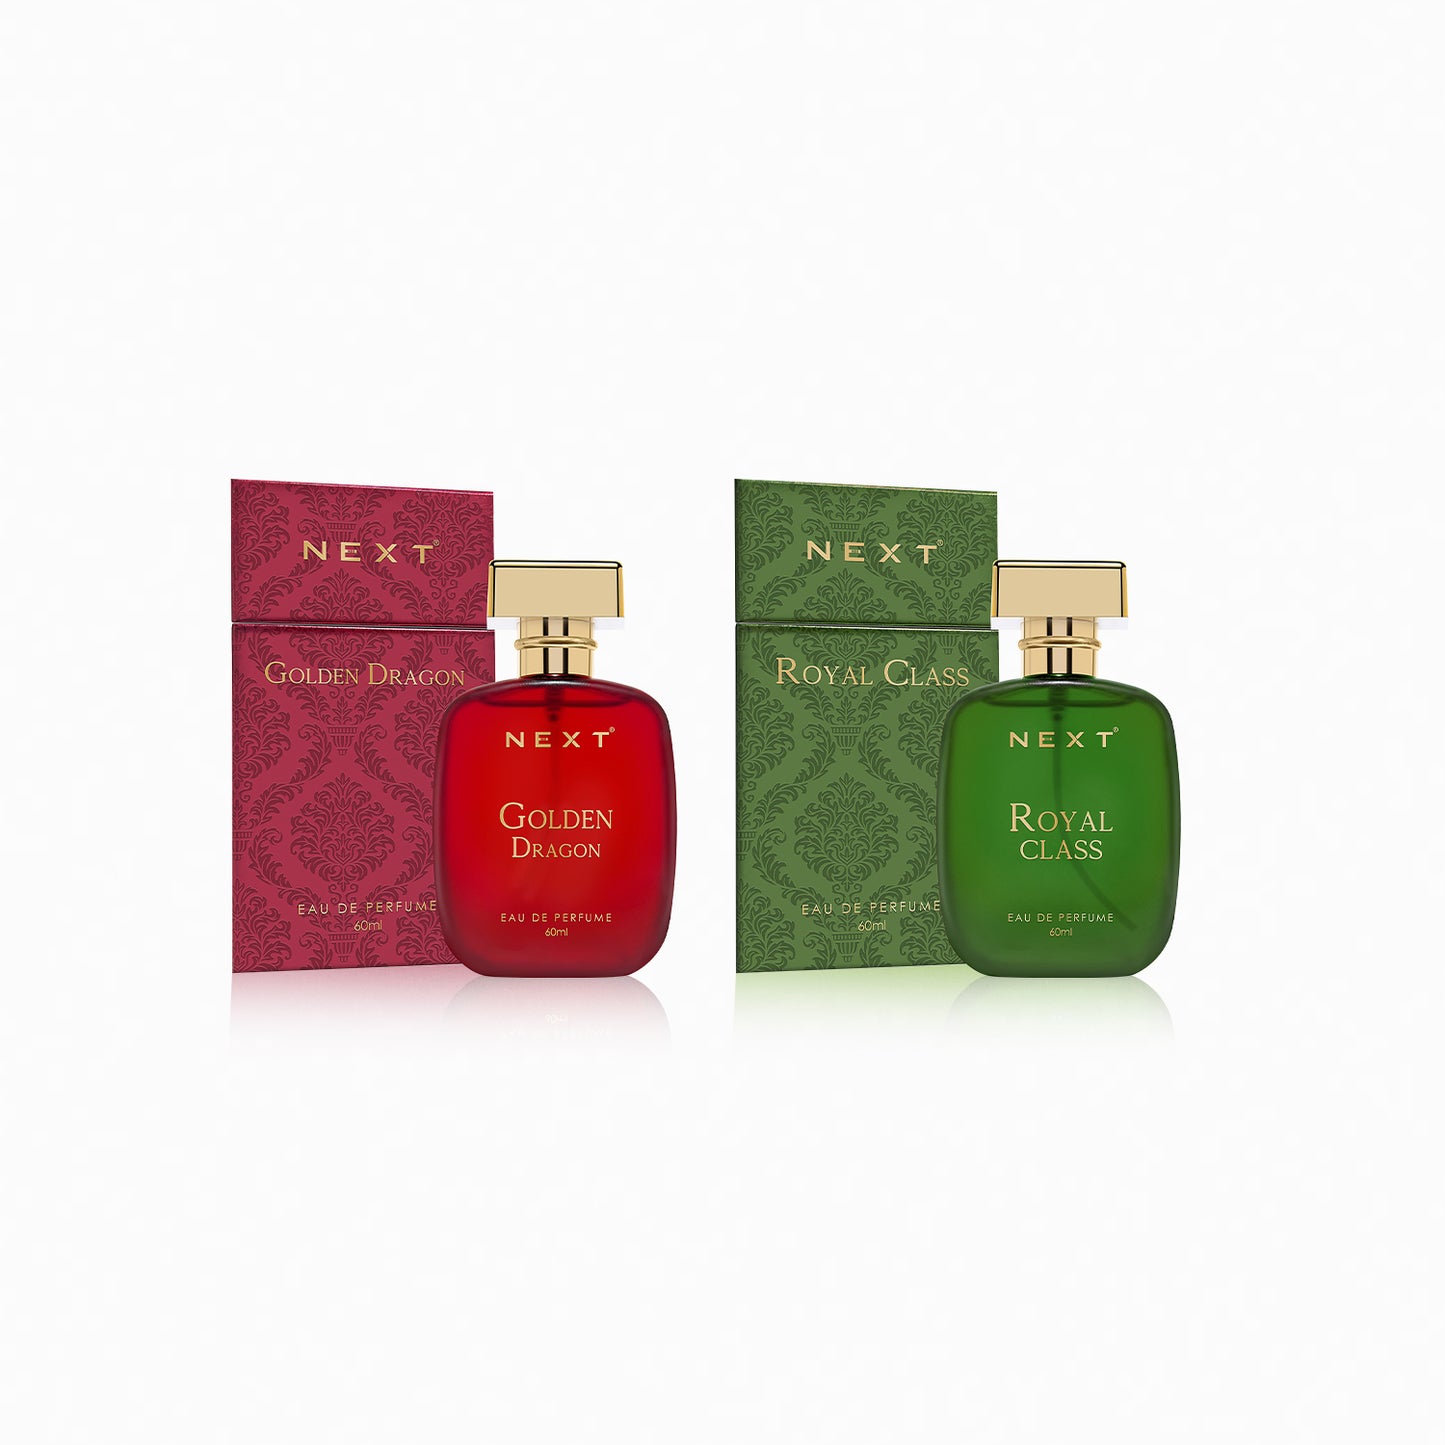 Next Luxury Combo Pack of 2 Perfume -Golden Dragon & Royal Class - 60ml Each